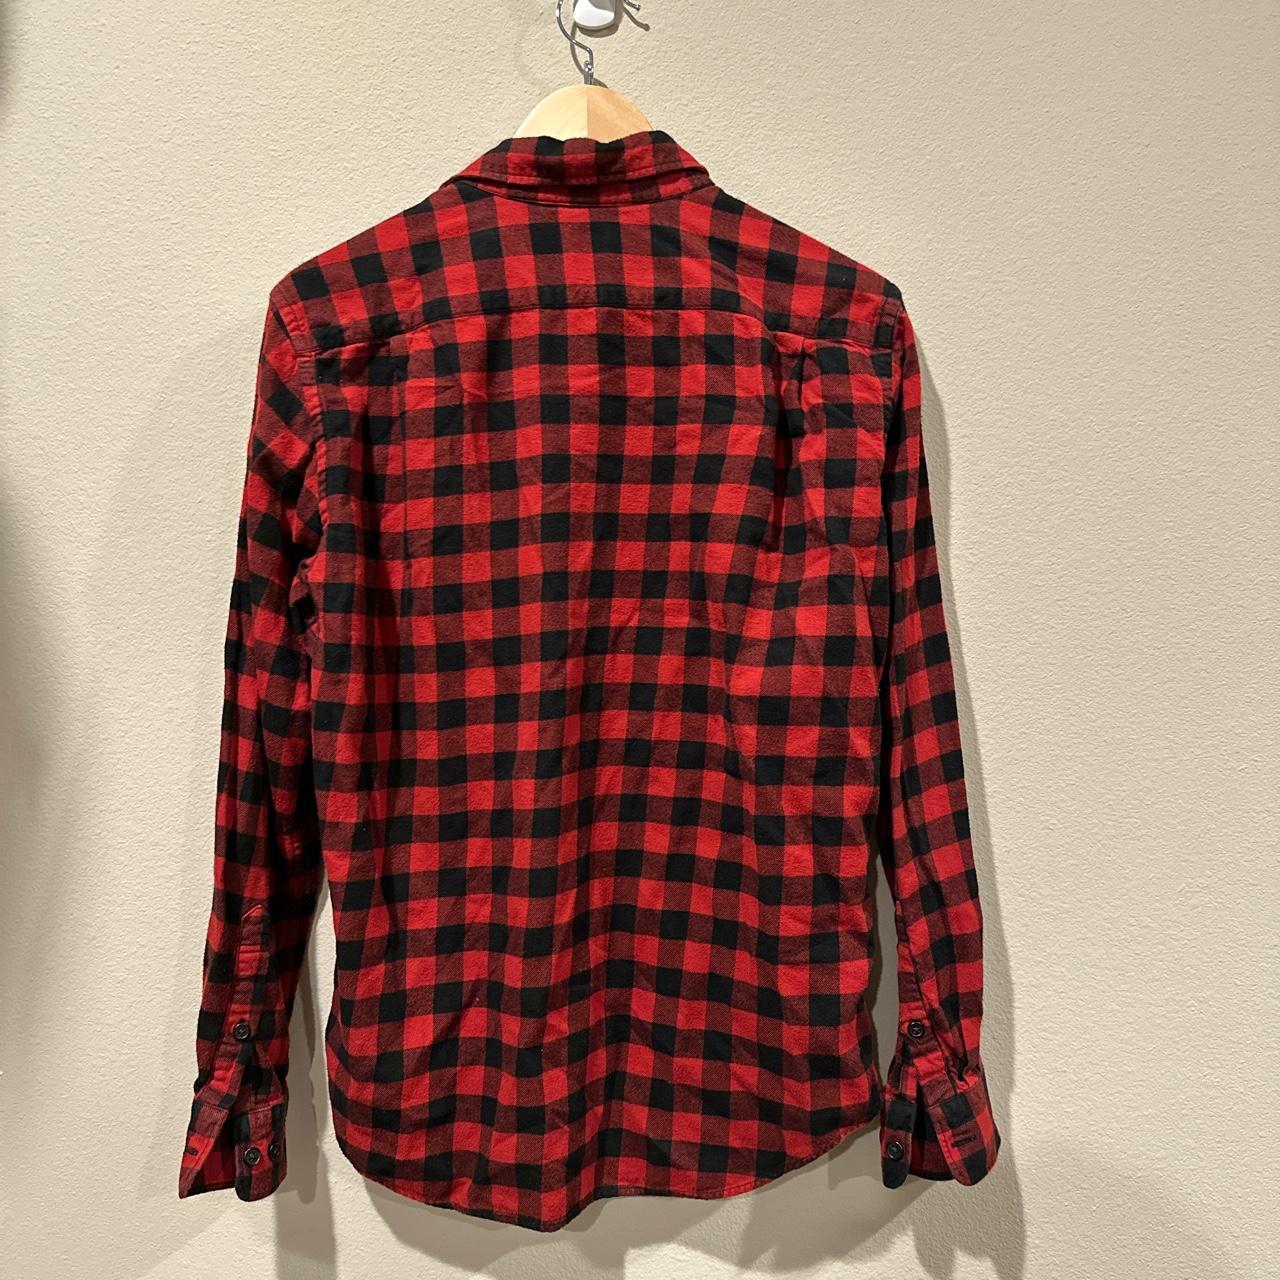 UNIQLO Men's Red and Black Shirt (3)